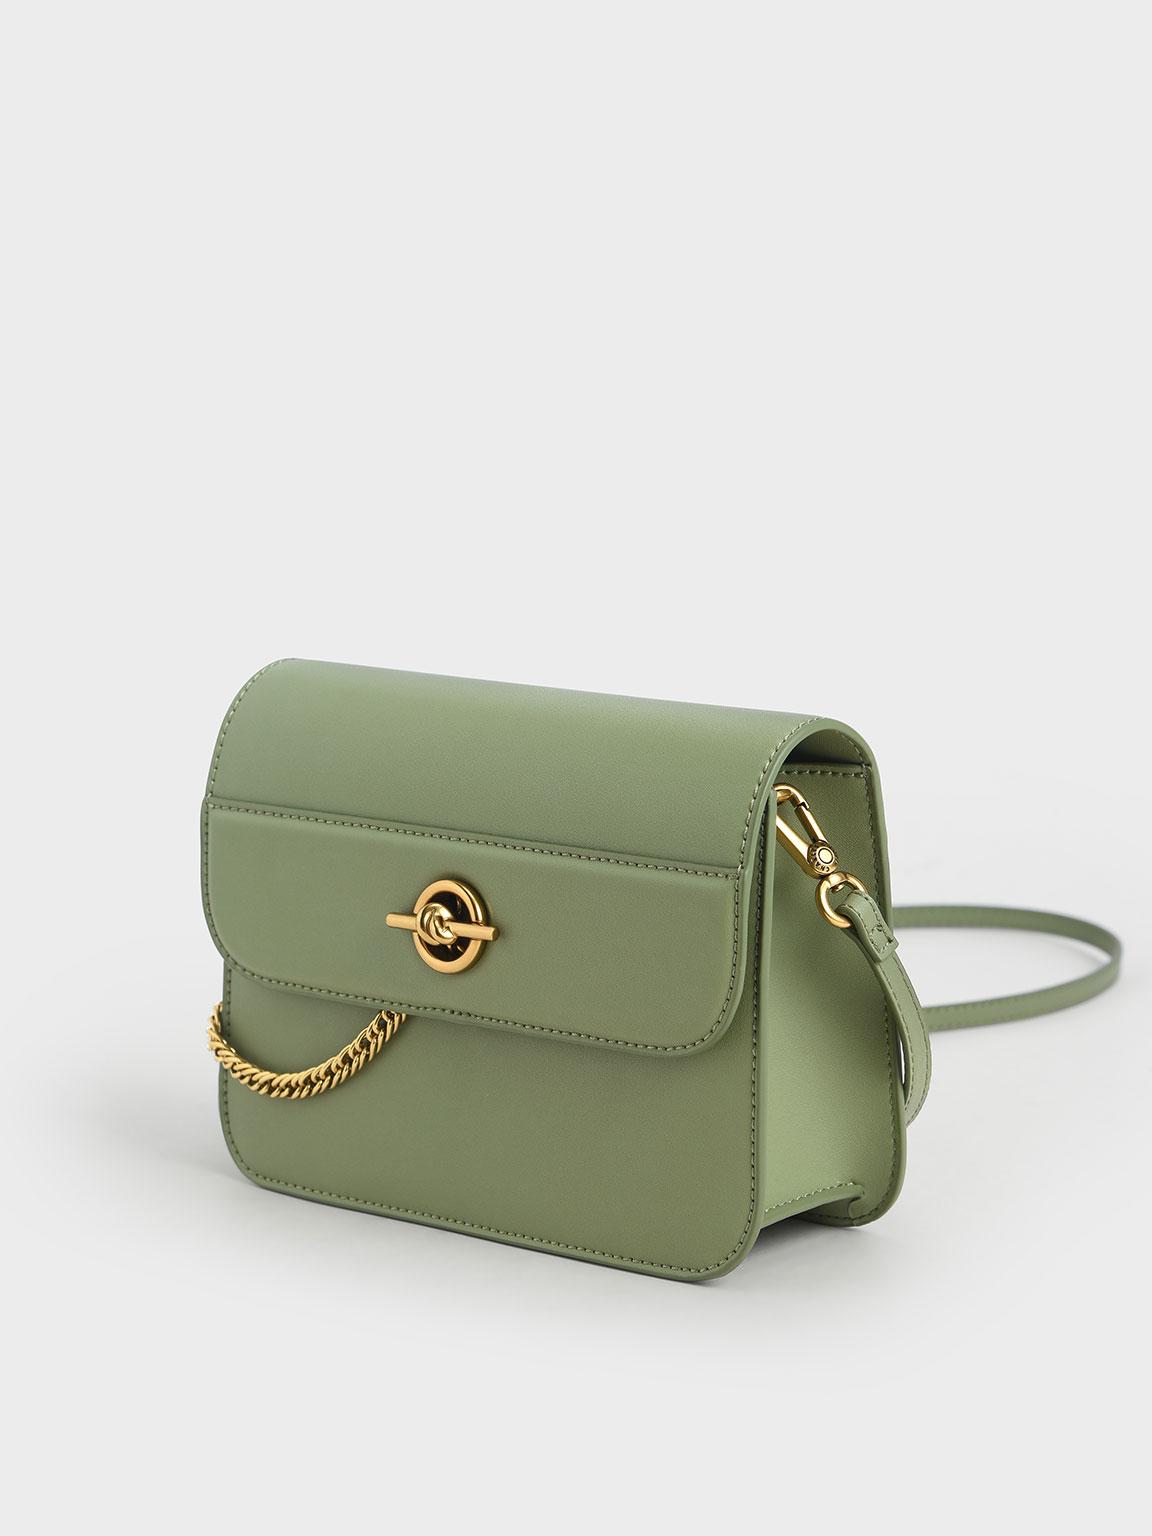 Charles & Keith Metallic Accent Chain Handle Bag in Sage Green 